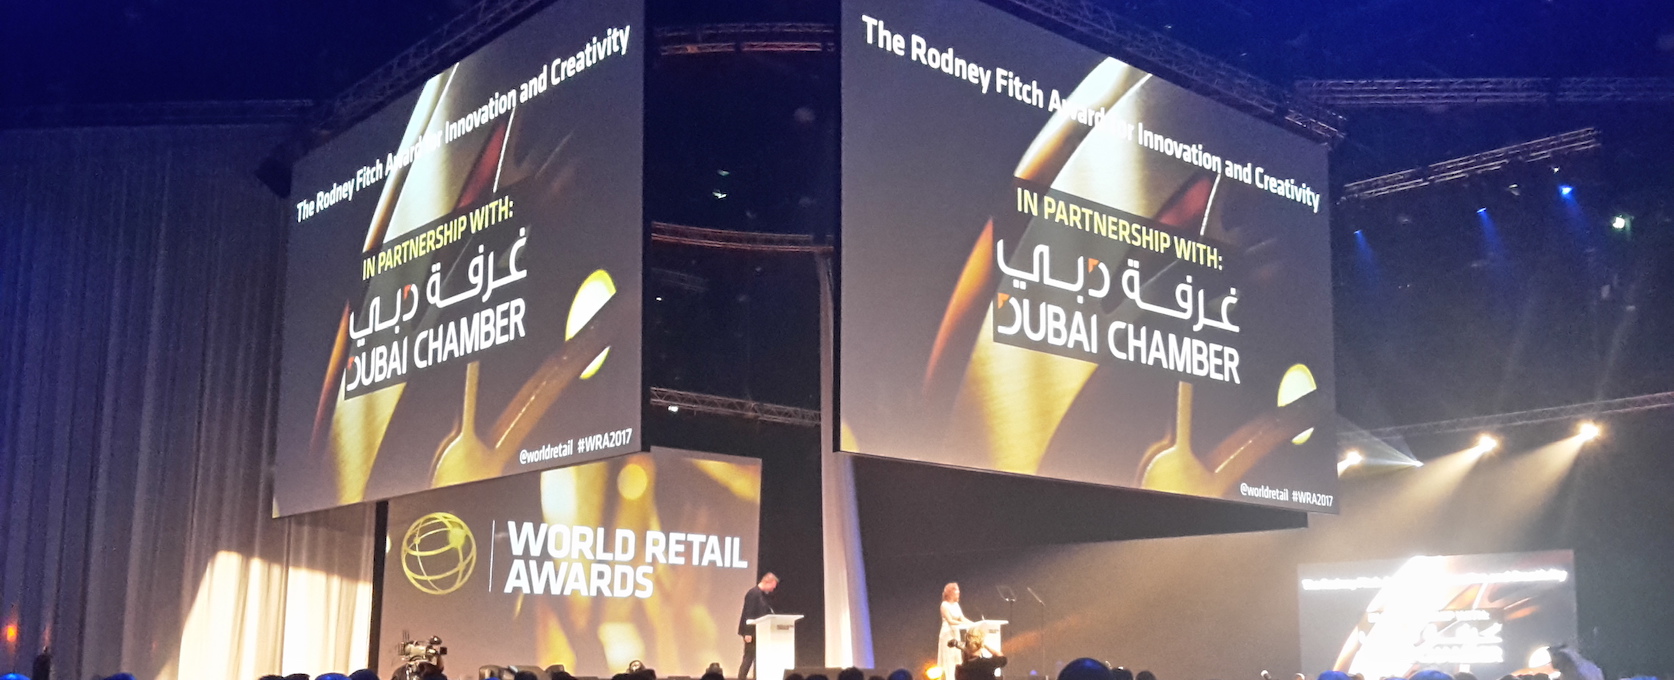 Highlights from the World Retail Congress 2017